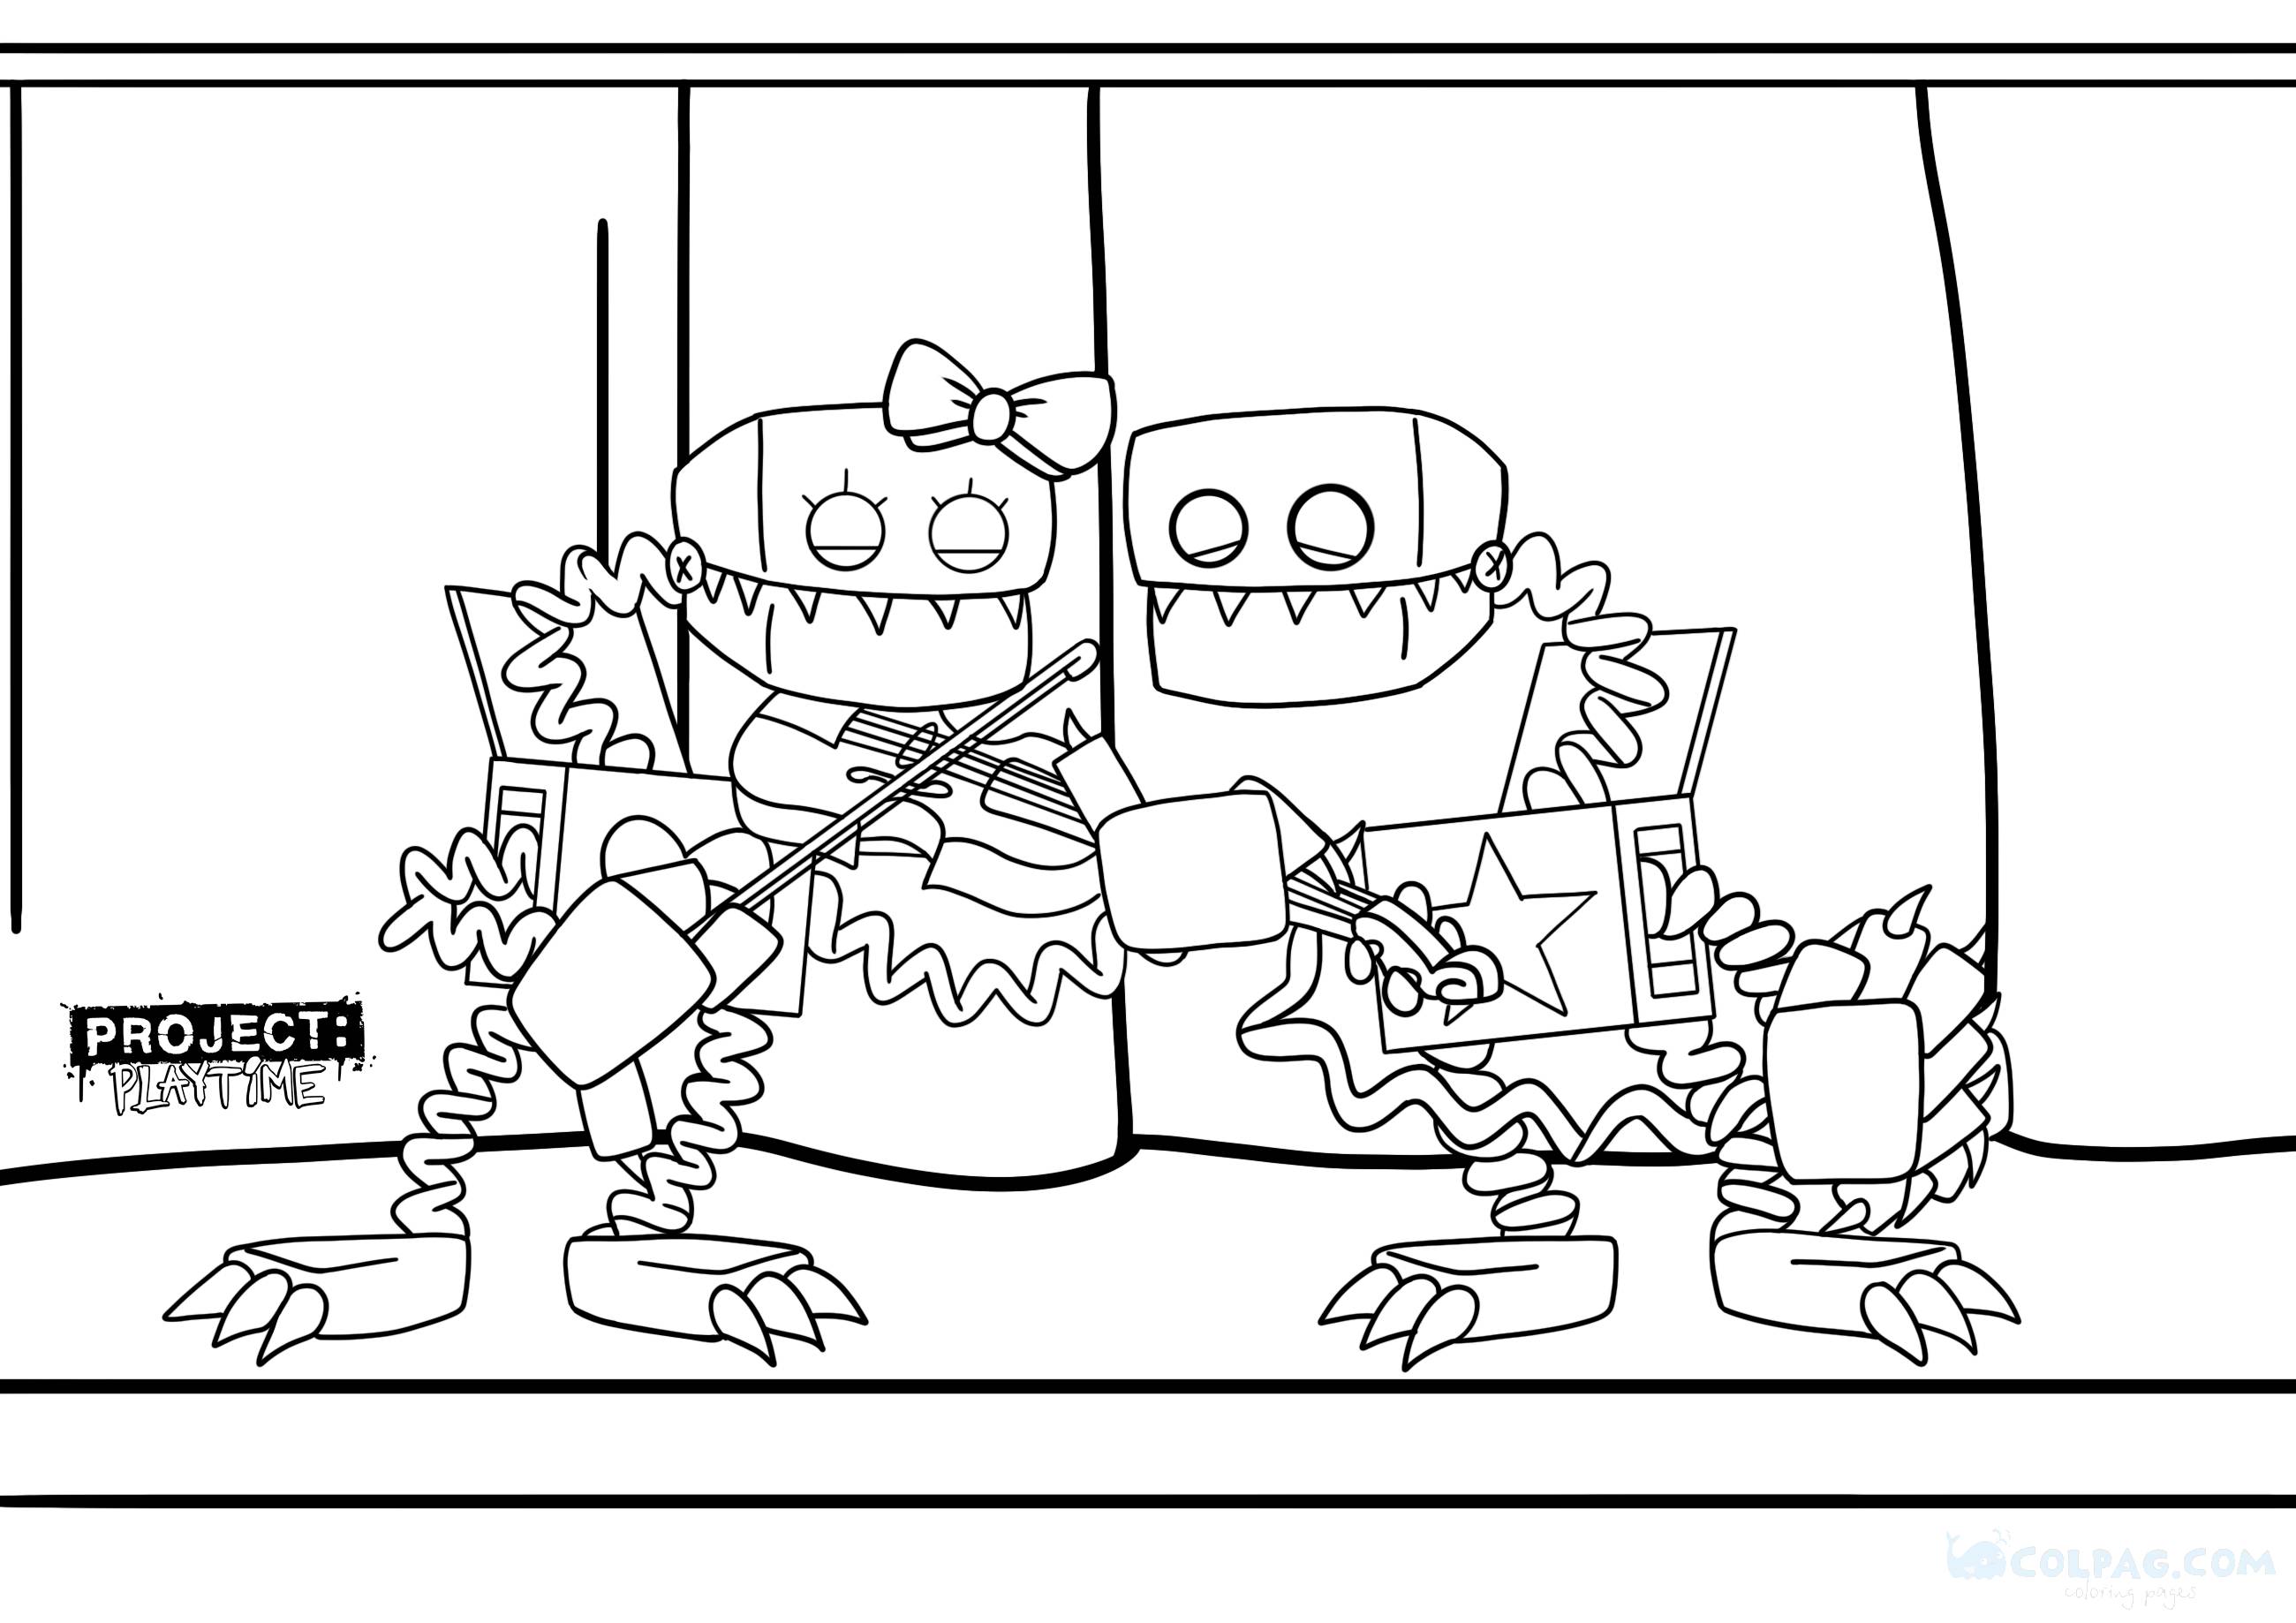 boxy-boo-project-playtime-coloring-page-colpag-com-5